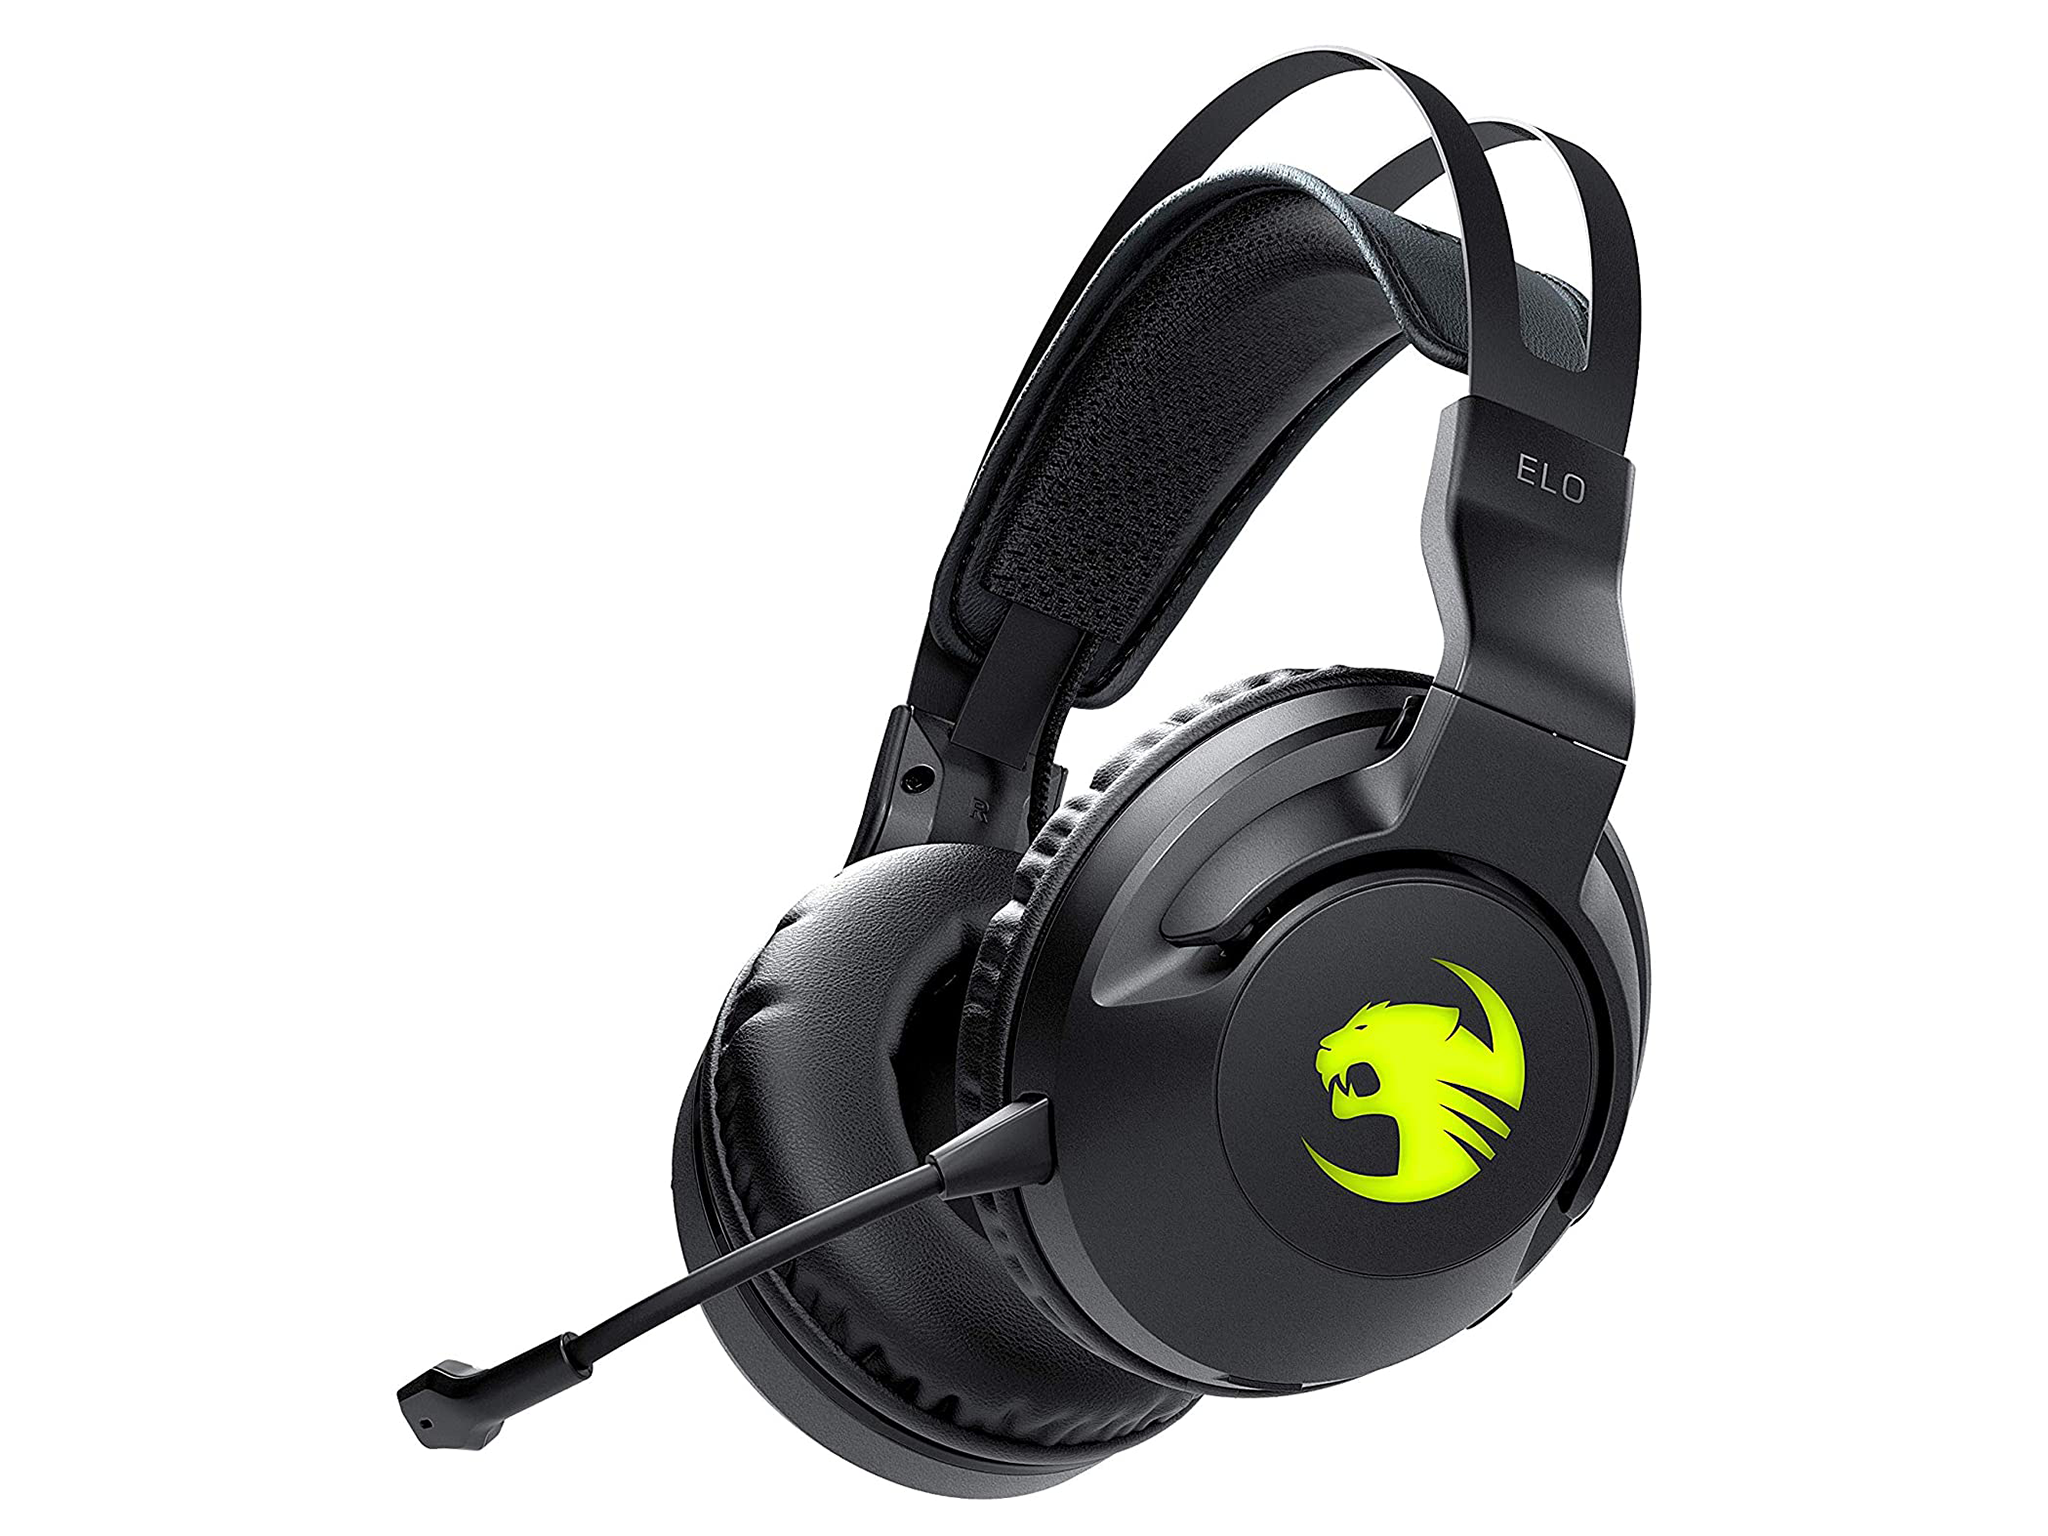 Roccat Elo 7.1 Air gaming headset indybest.png